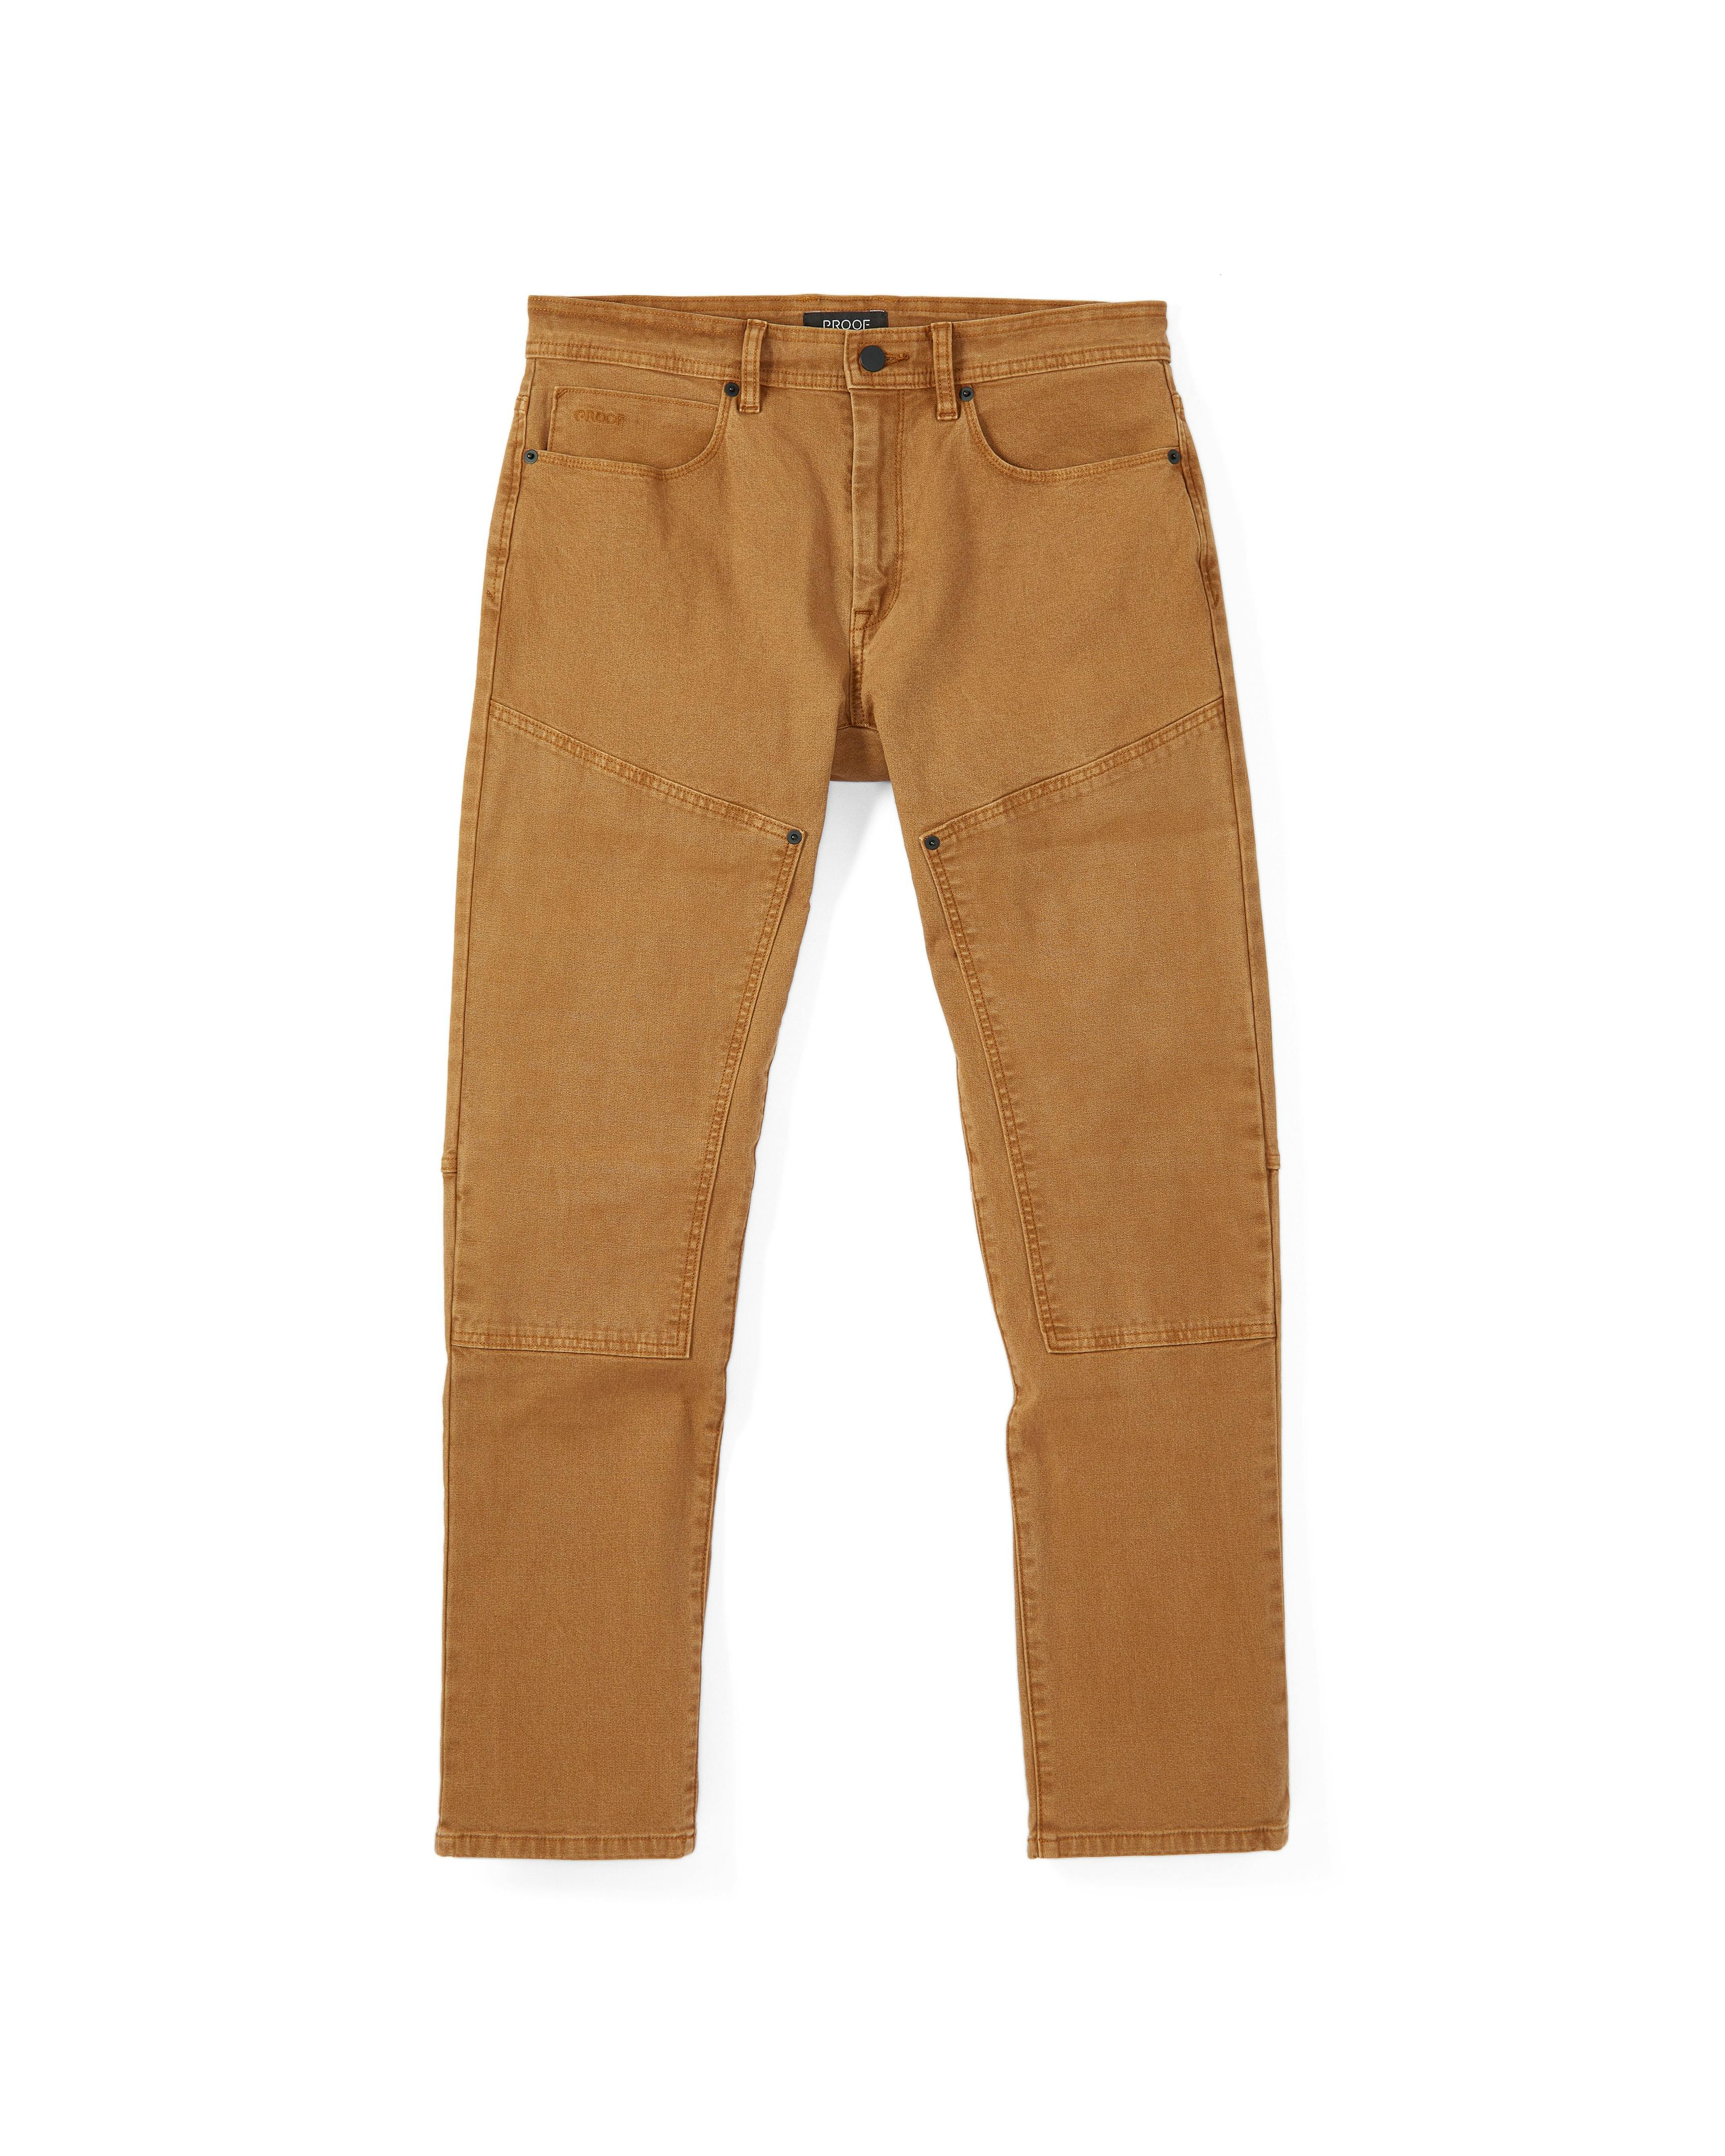 Proof Rover Double-Knee Work Pant - Slim - Canyon | Work Pants | Huckberry